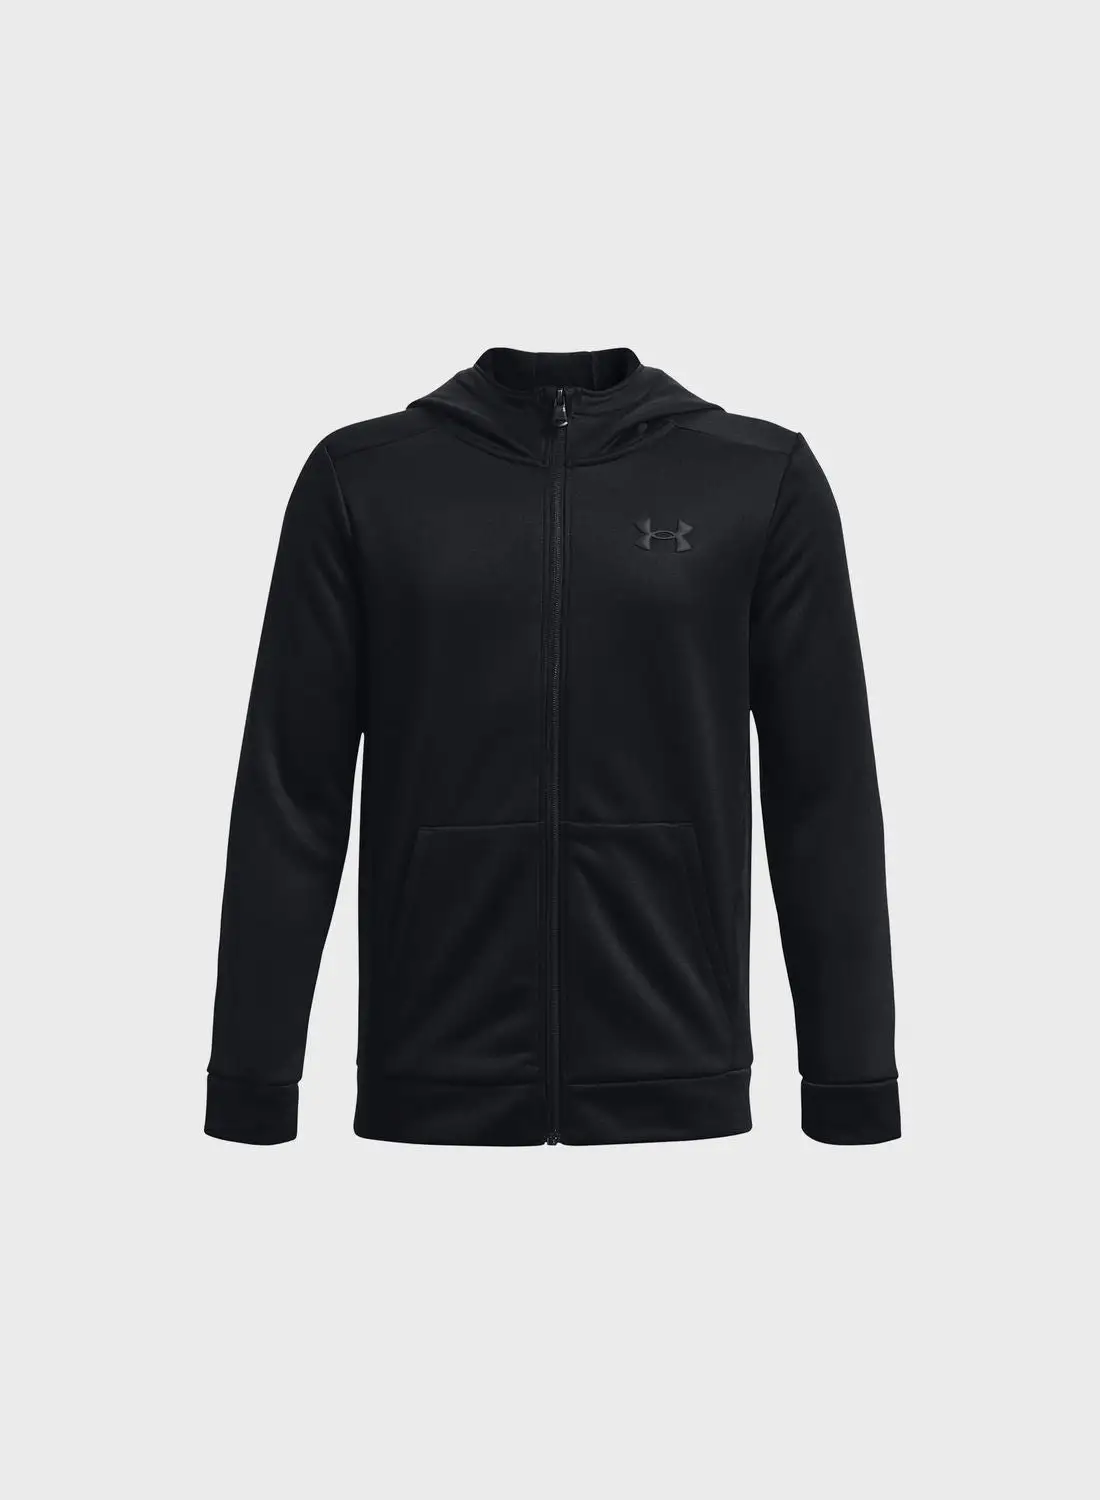 UNDER ARMOUR Youth Fleece Hoodie